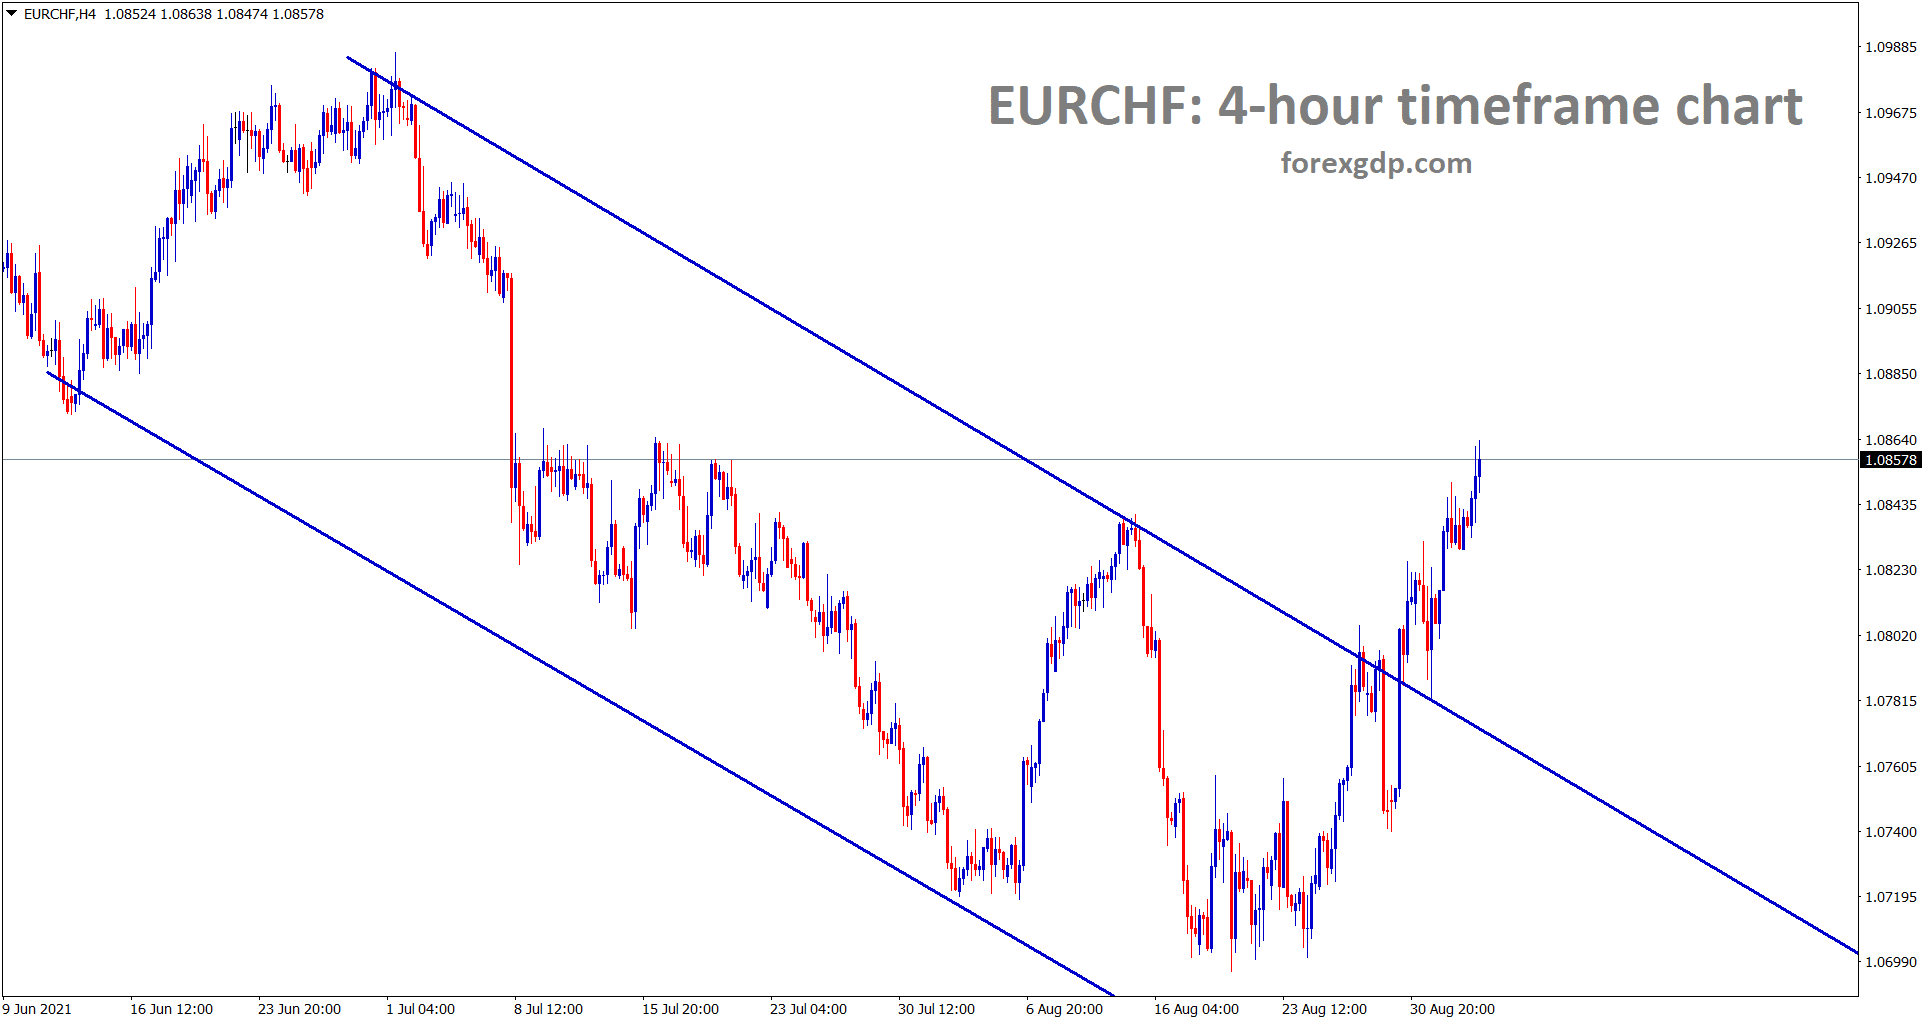 EURCHF has broken the top of the descending channel and rising up strongly